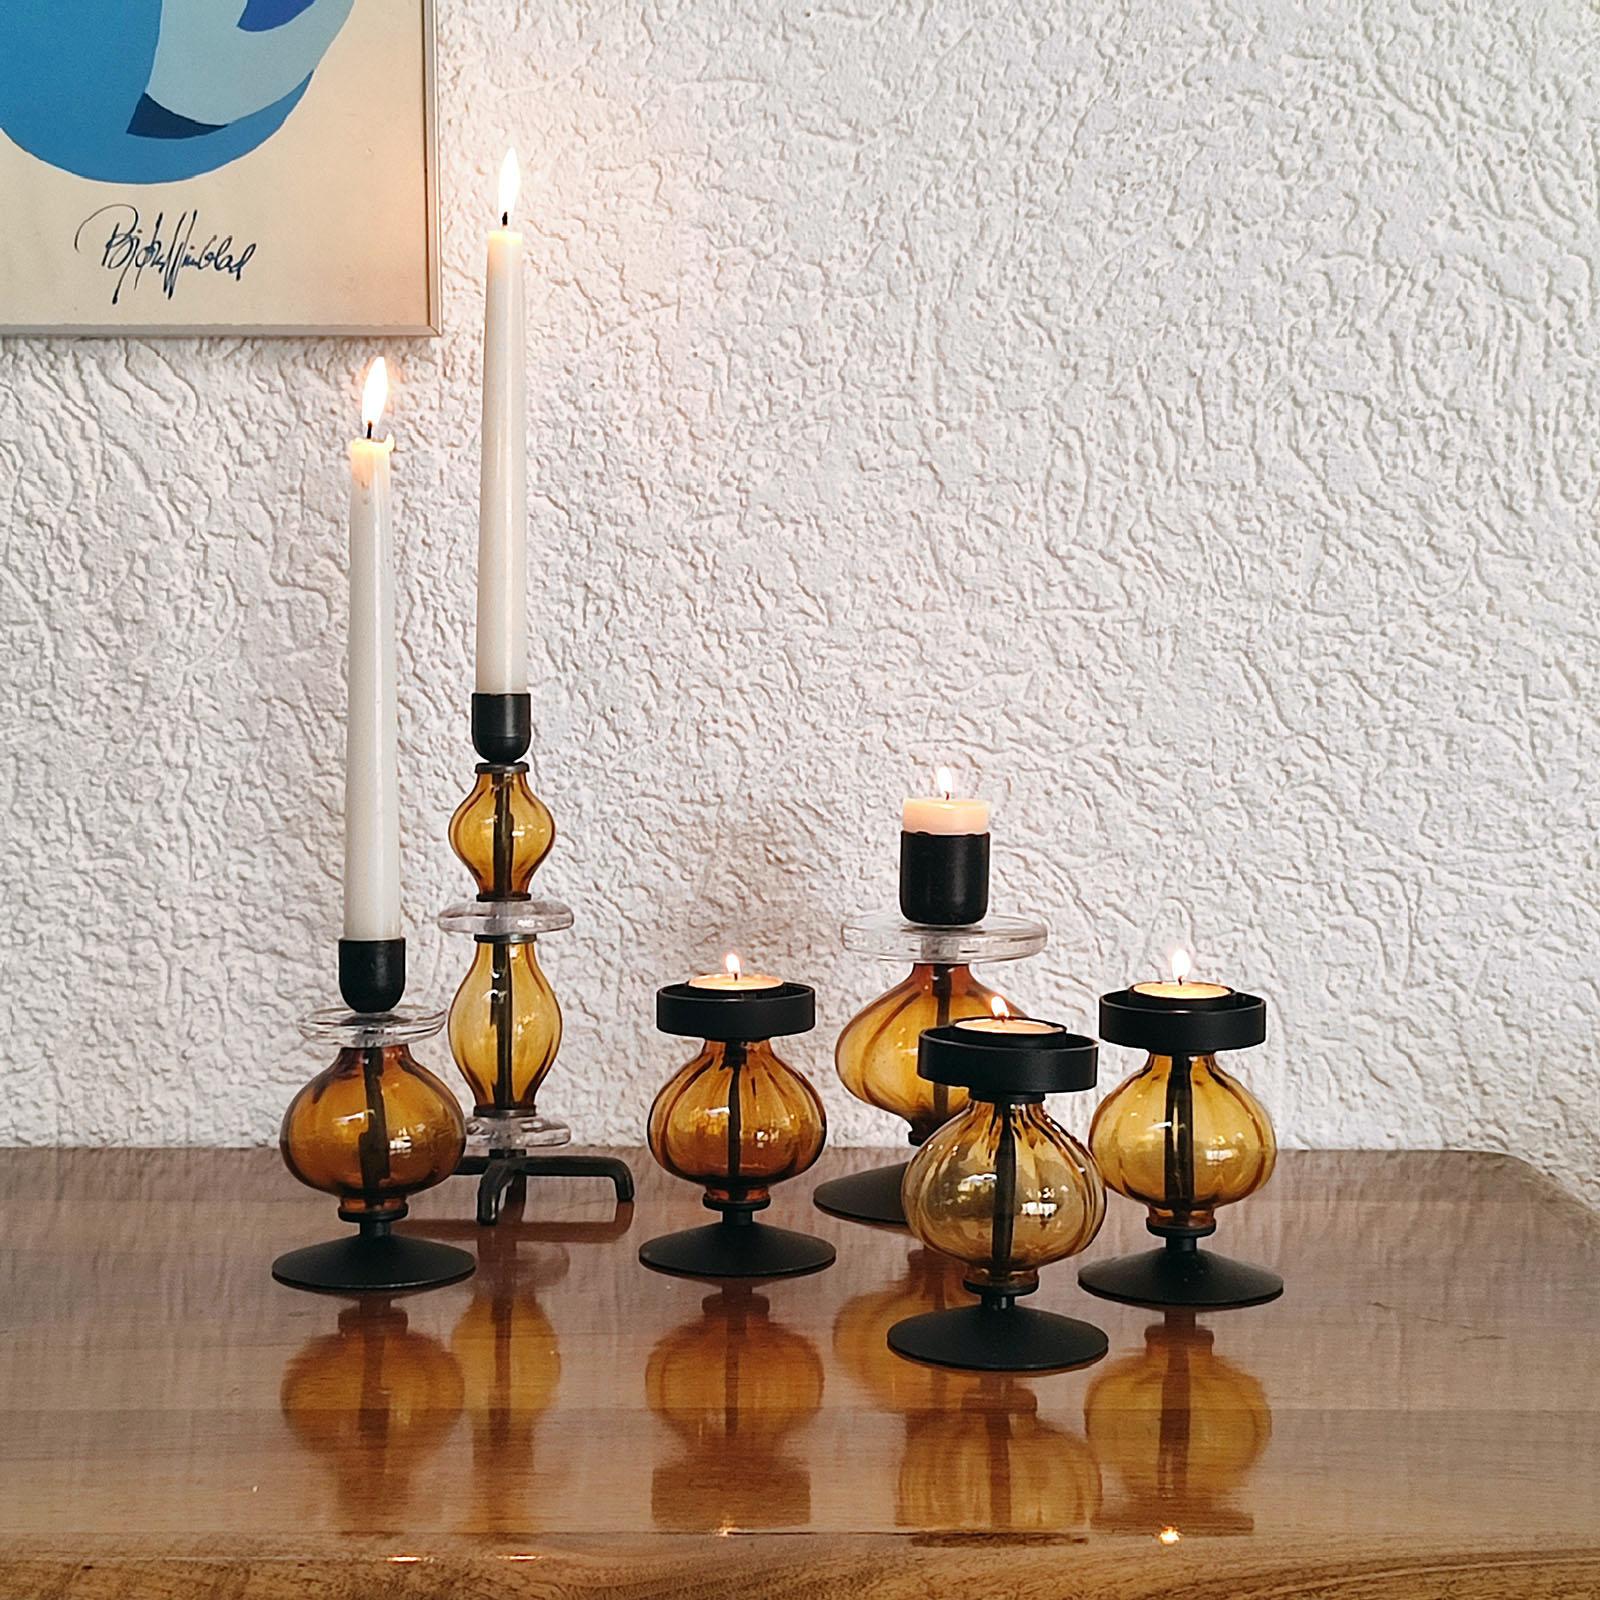 Mid-Century Modern, Swedish, set of four candle holders, black painted metal and amber art glass, designed by Erik Hoglund for Boda, Sweden. Base and top made of black painted metal. Body made of ribbed amber art glass to get an artistic visual